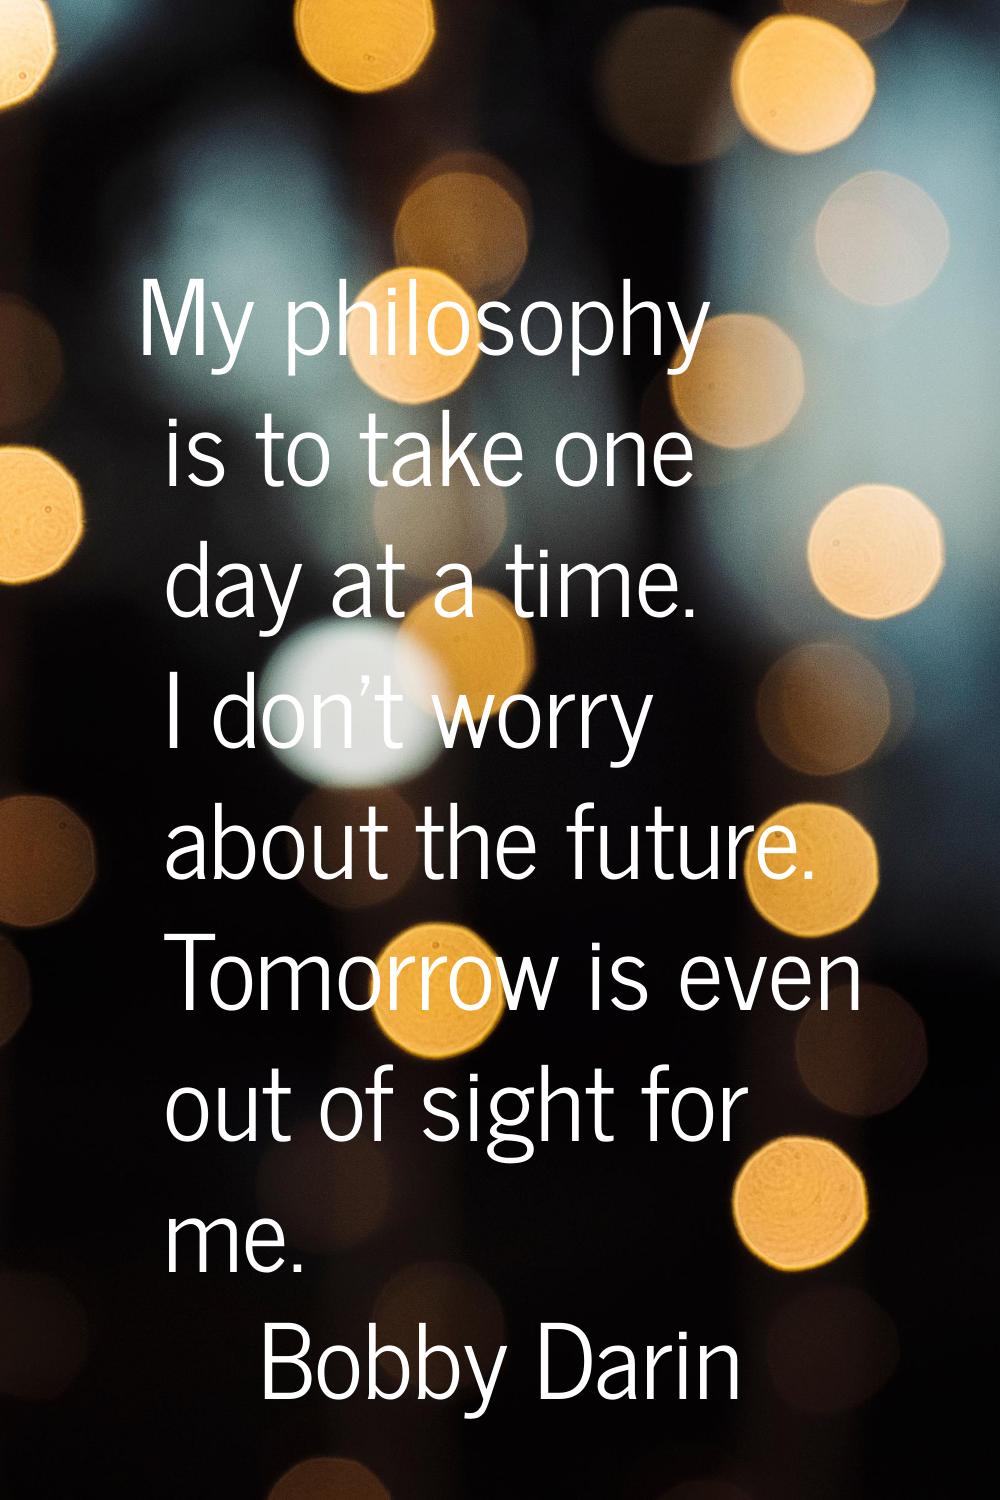 My philosophy is to take one day at a time. I don't worry about the future. Tomorrow is even out of